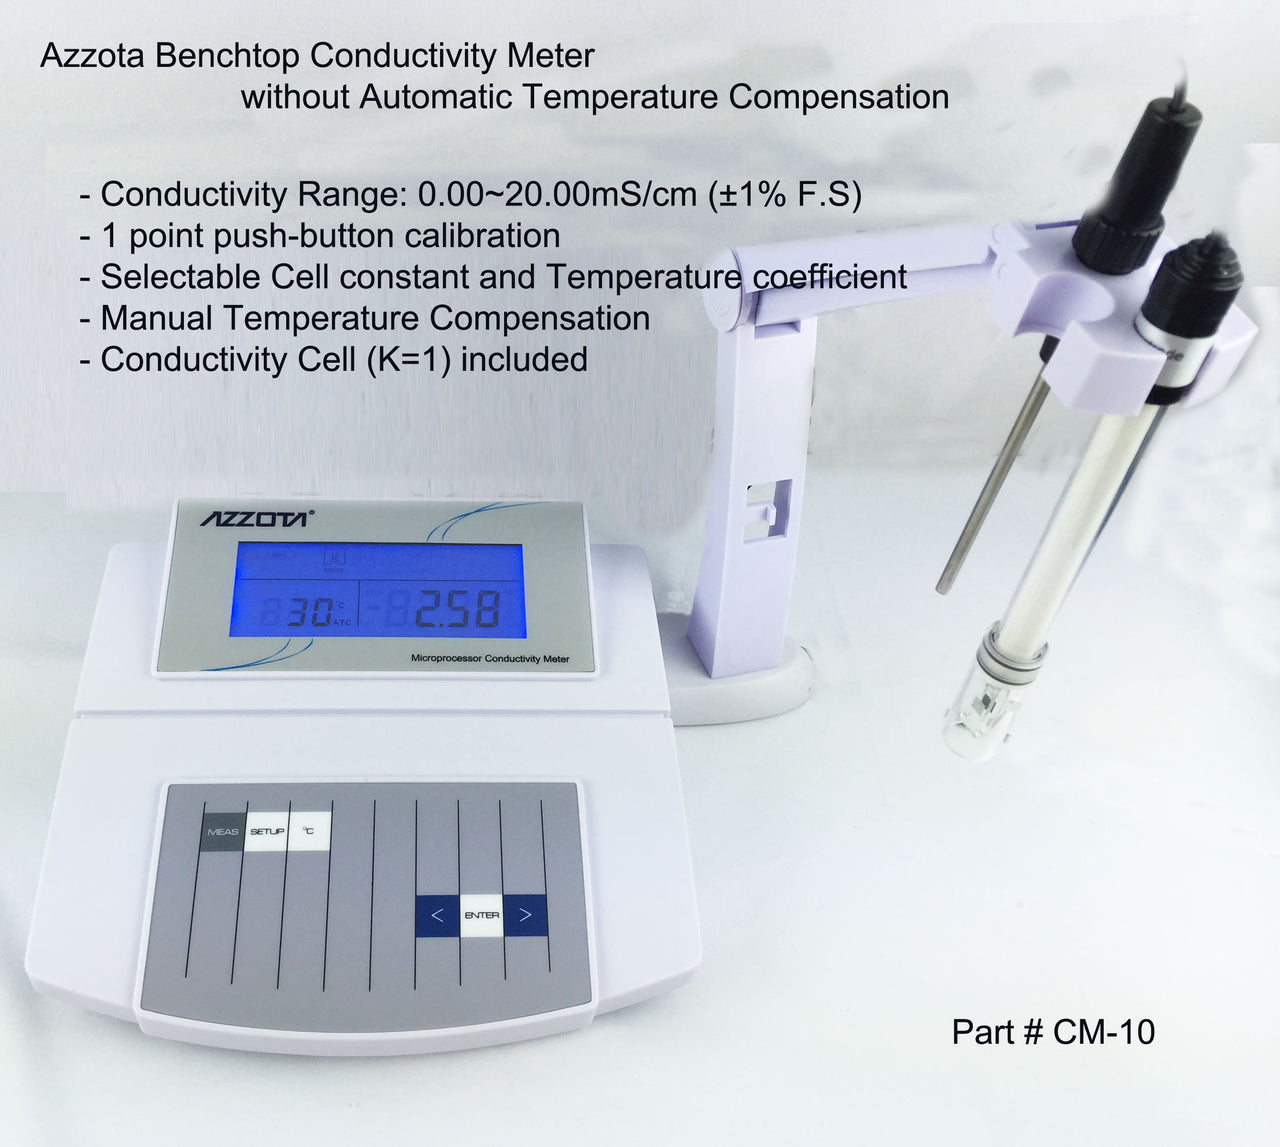 Benchtop Conductivity Meter, Conductivity Range: 0.05 - 2x105 uS/cm Conductivity Accuracy: +/- 1% Full Temperature Compensation: 0-40'C(manual) Temperature Coefficient: 0-5% per 'C Dimension: 210mm x 205mm x 65mm Power: 12V DC, using AC adapters Weight: 1.5 kg / 3.3 lbs